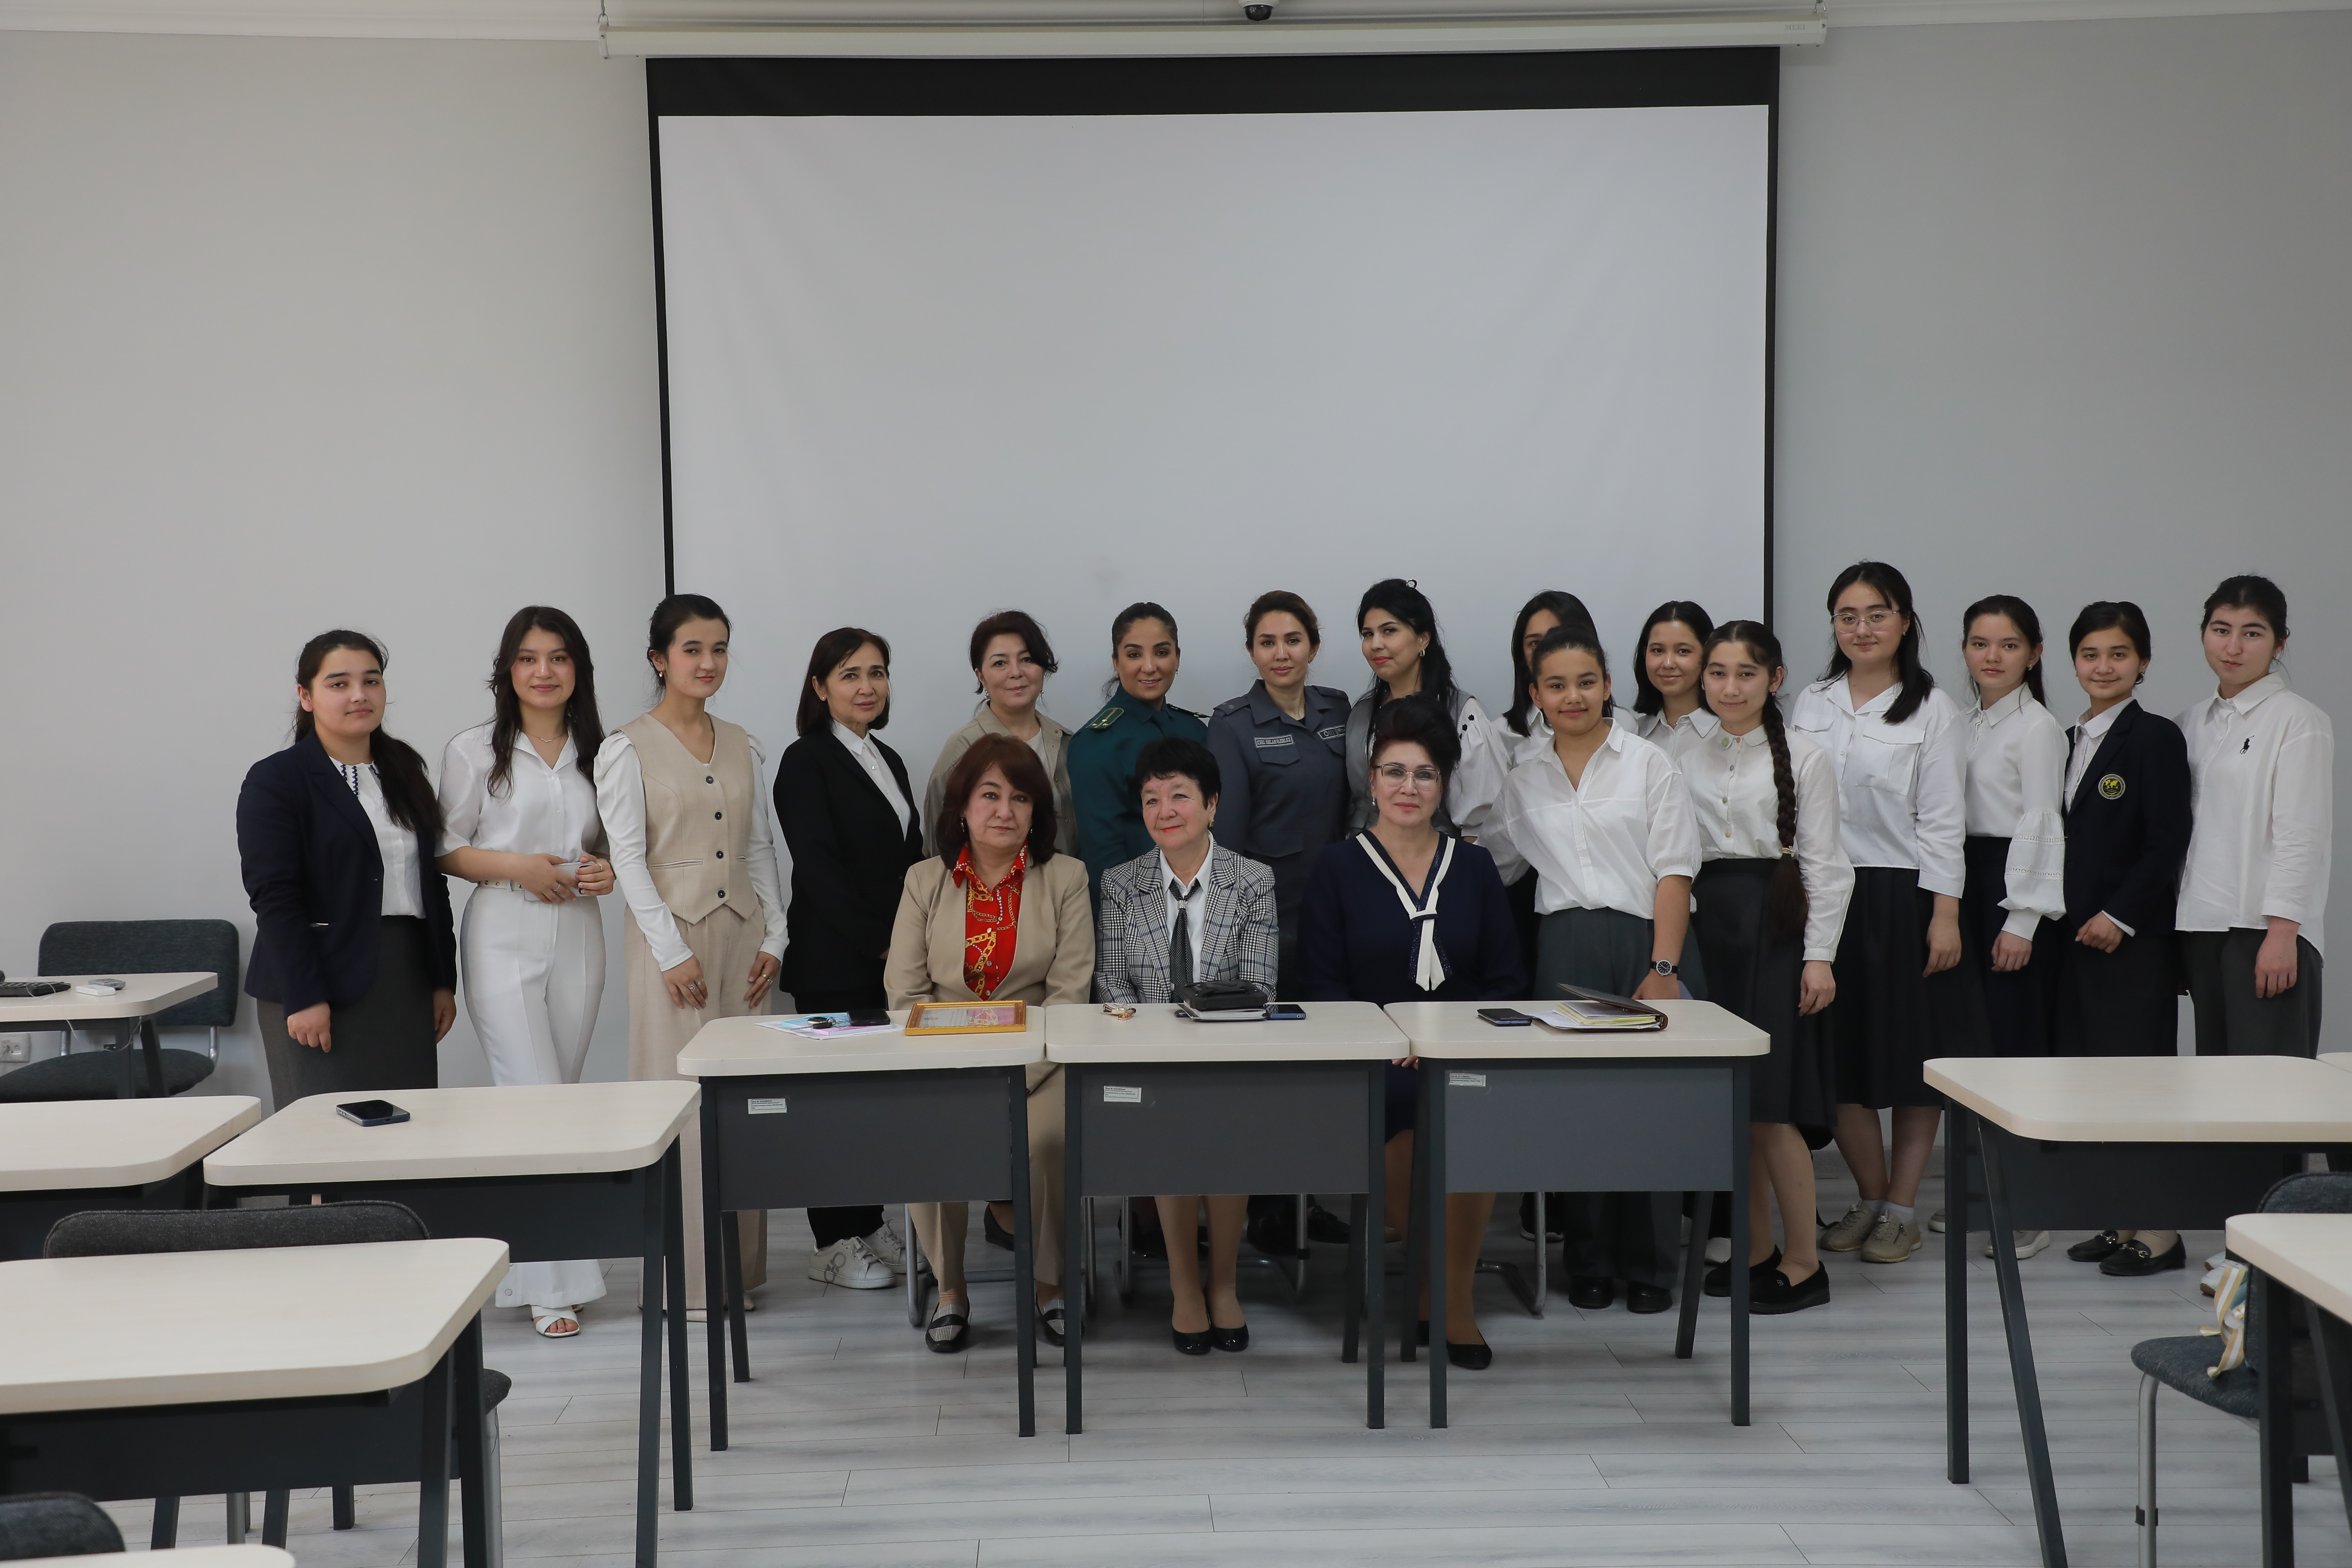 A discussion of gender equality issues took place at the University of World Economy and Diplomacy